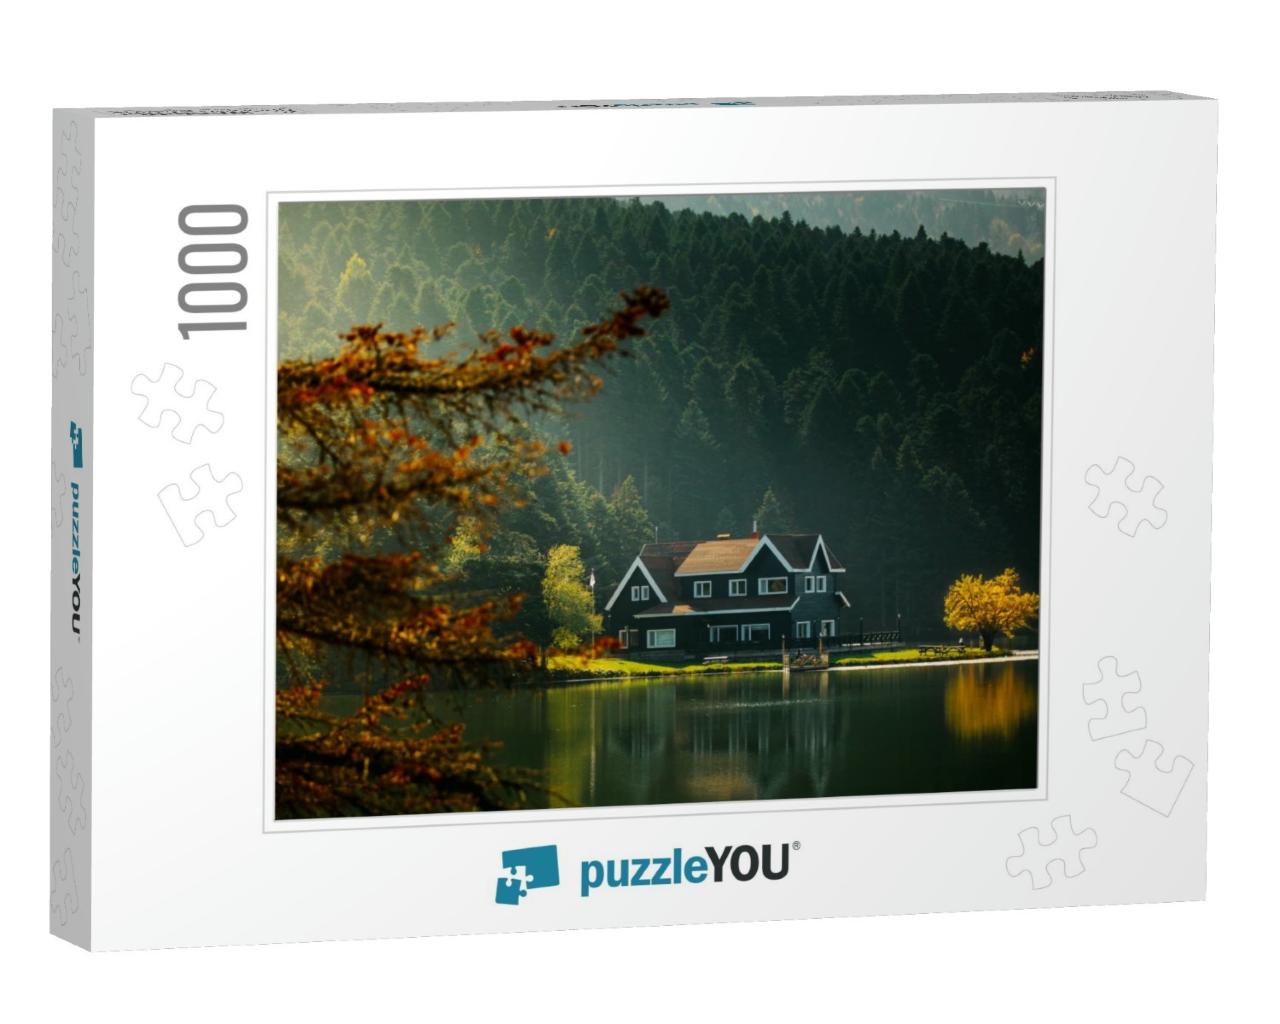 Golcuk National Park Bolu Turkey. Autumn Wooden Lake Hous... Jigsaw Puzzle with 1000 pieces